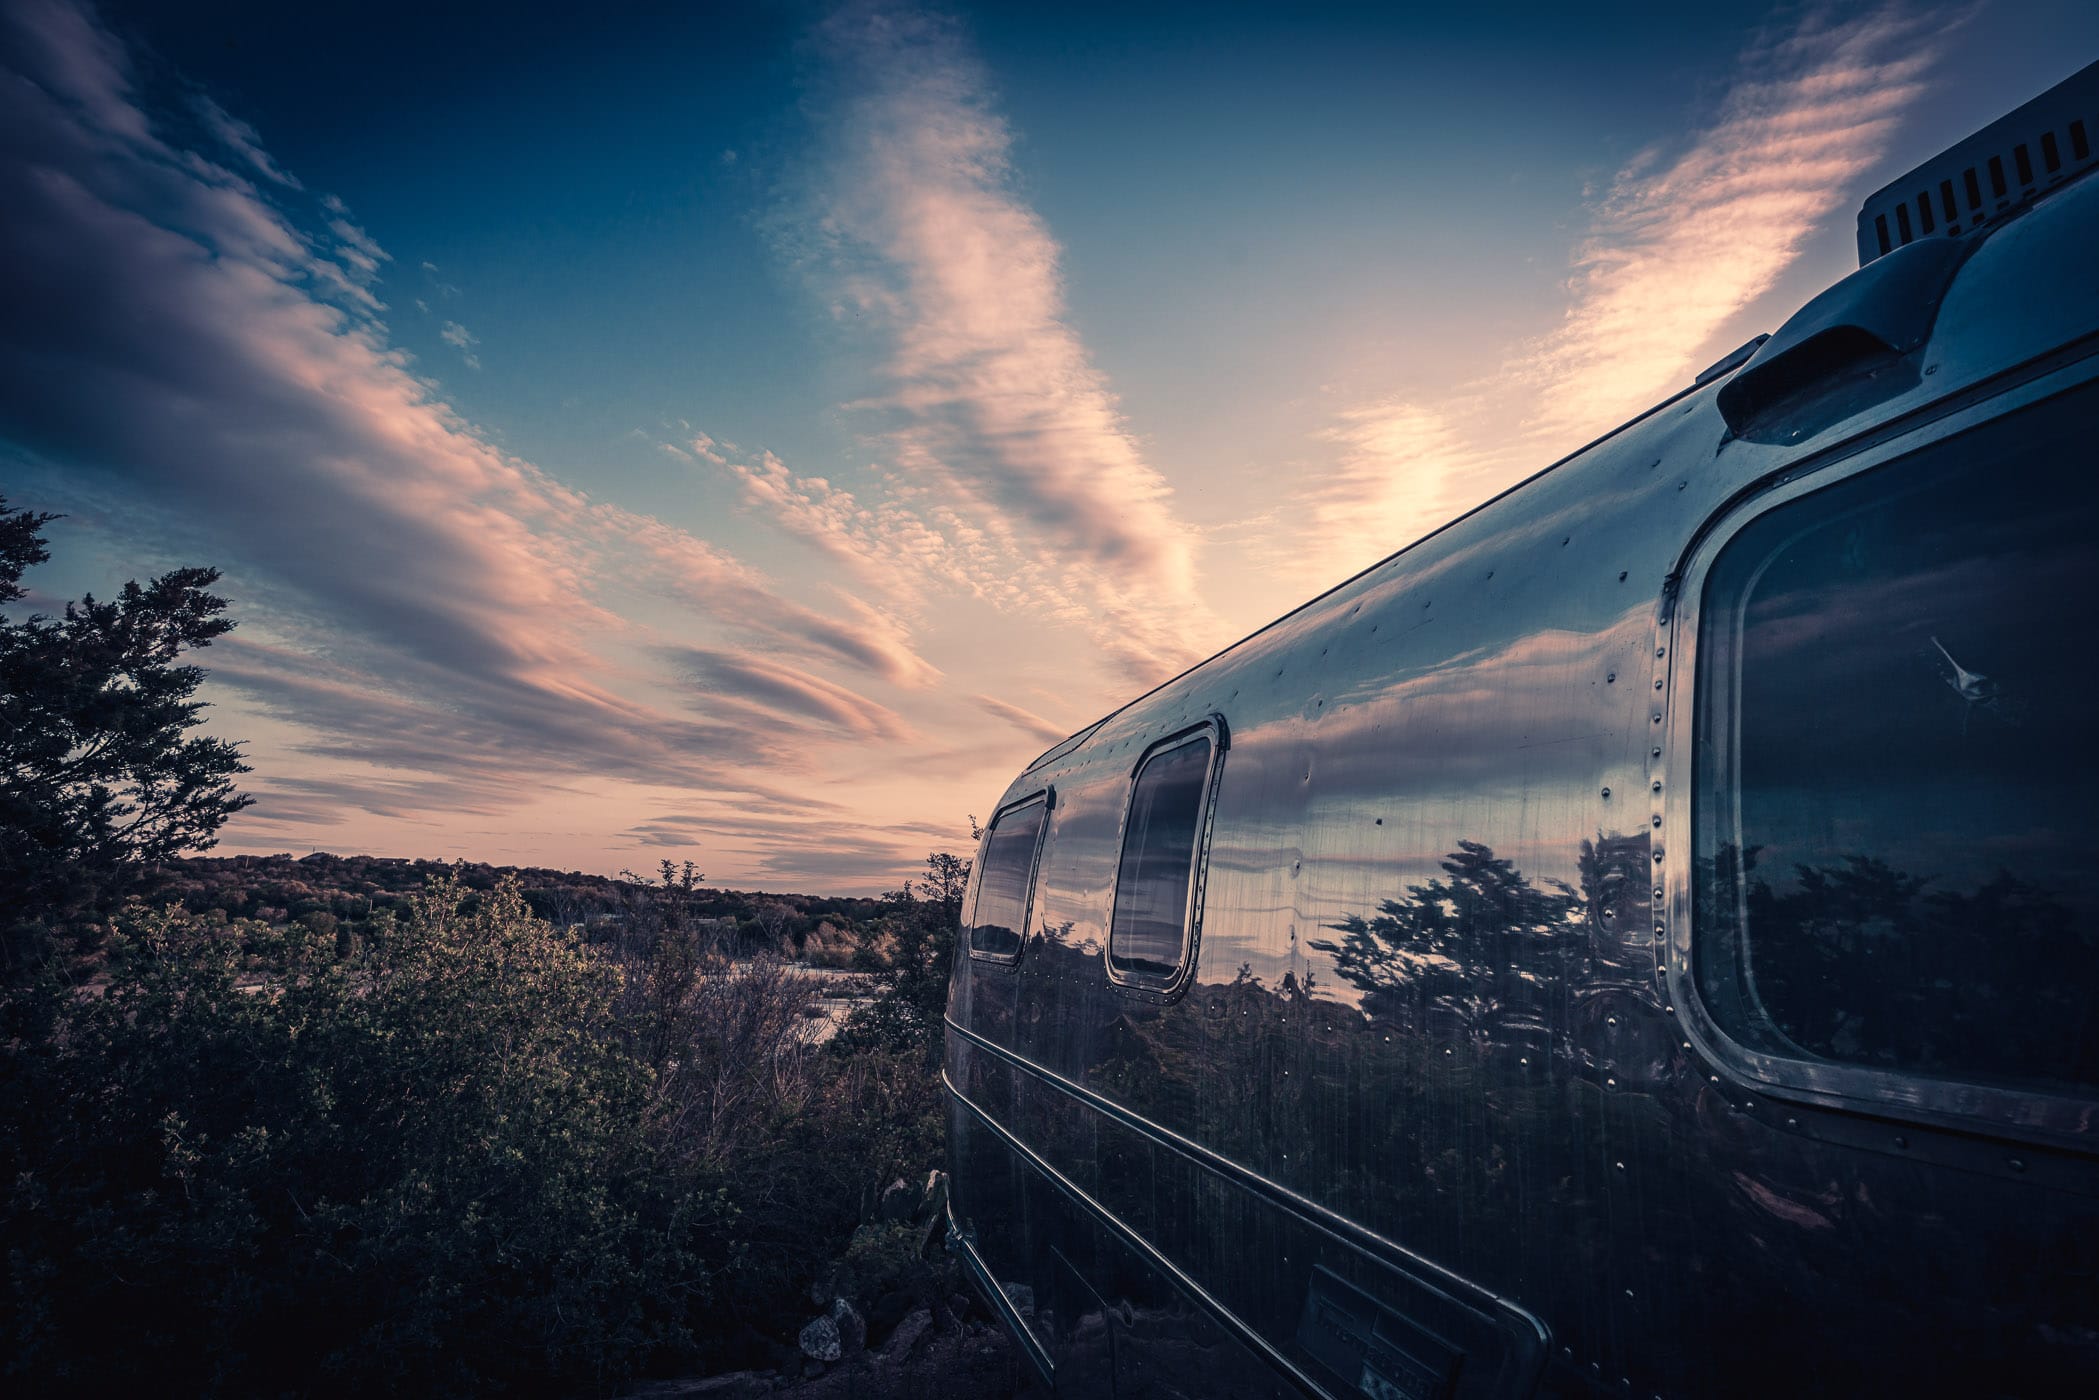 The sunsets on an Airstream trailer on a bluff overlooking the LLano River near Mason, Texas.